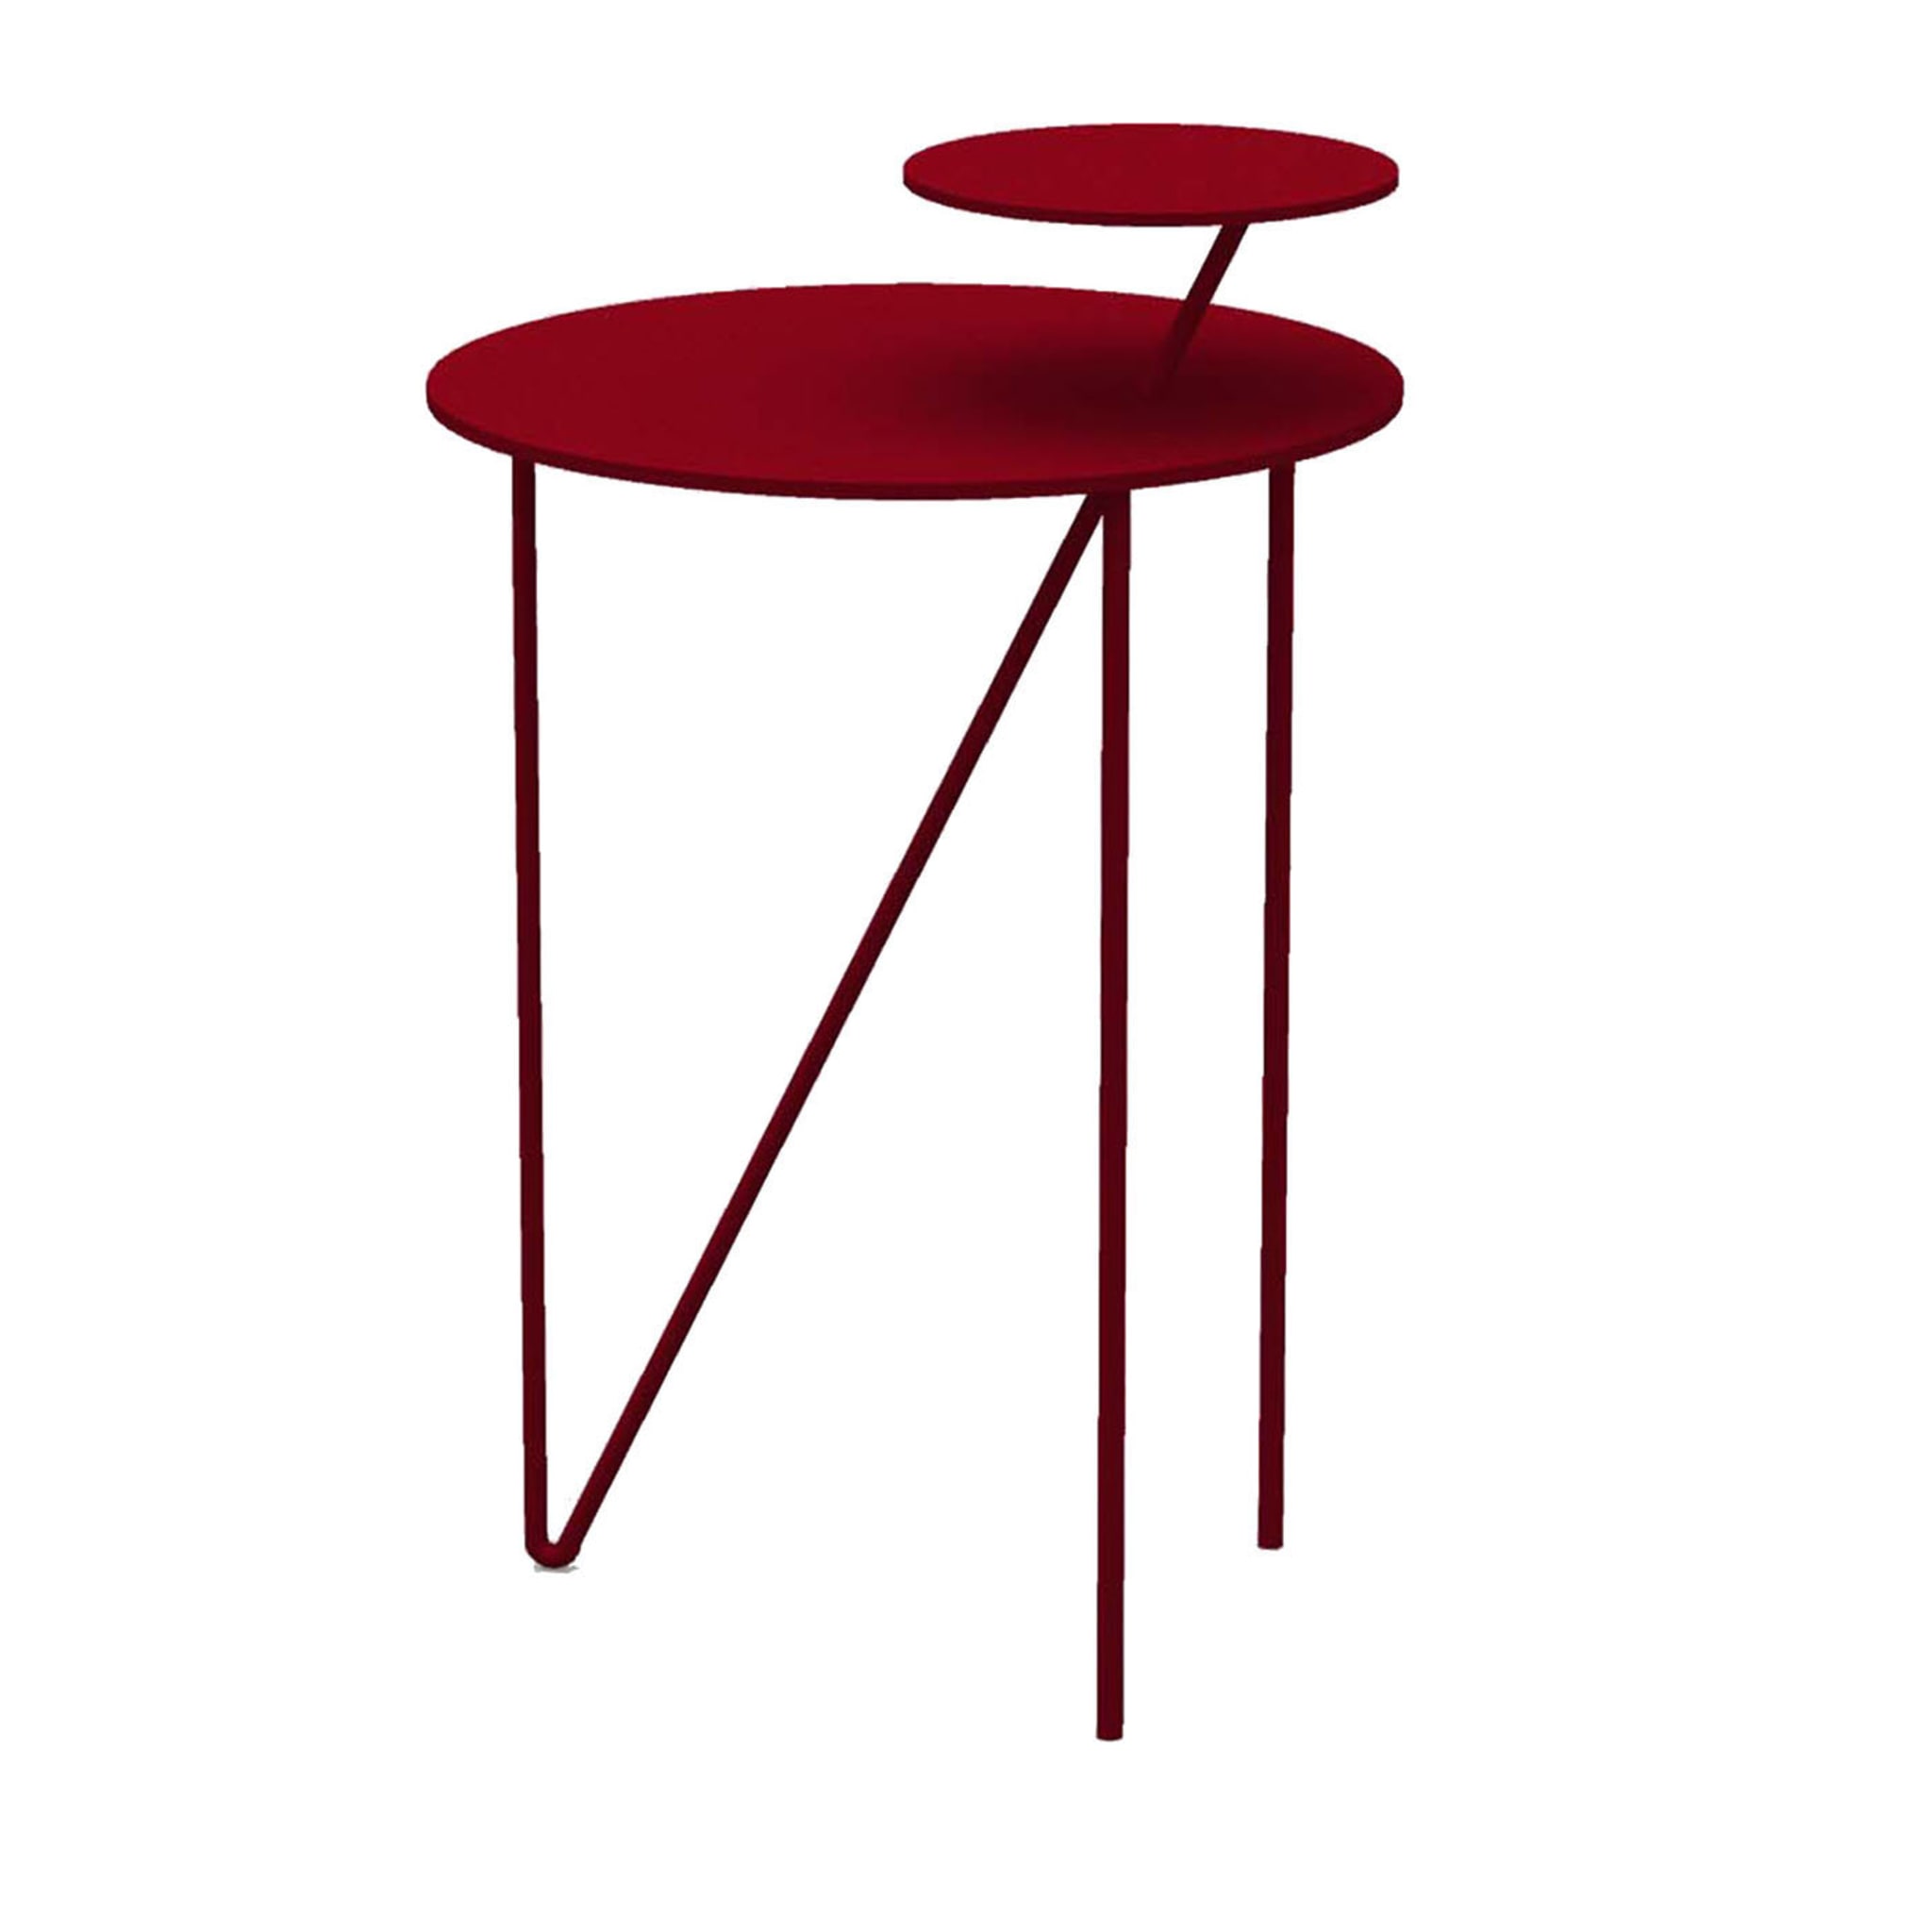 Passante Tall Ruby Red Coffee Table - Alternative view 1